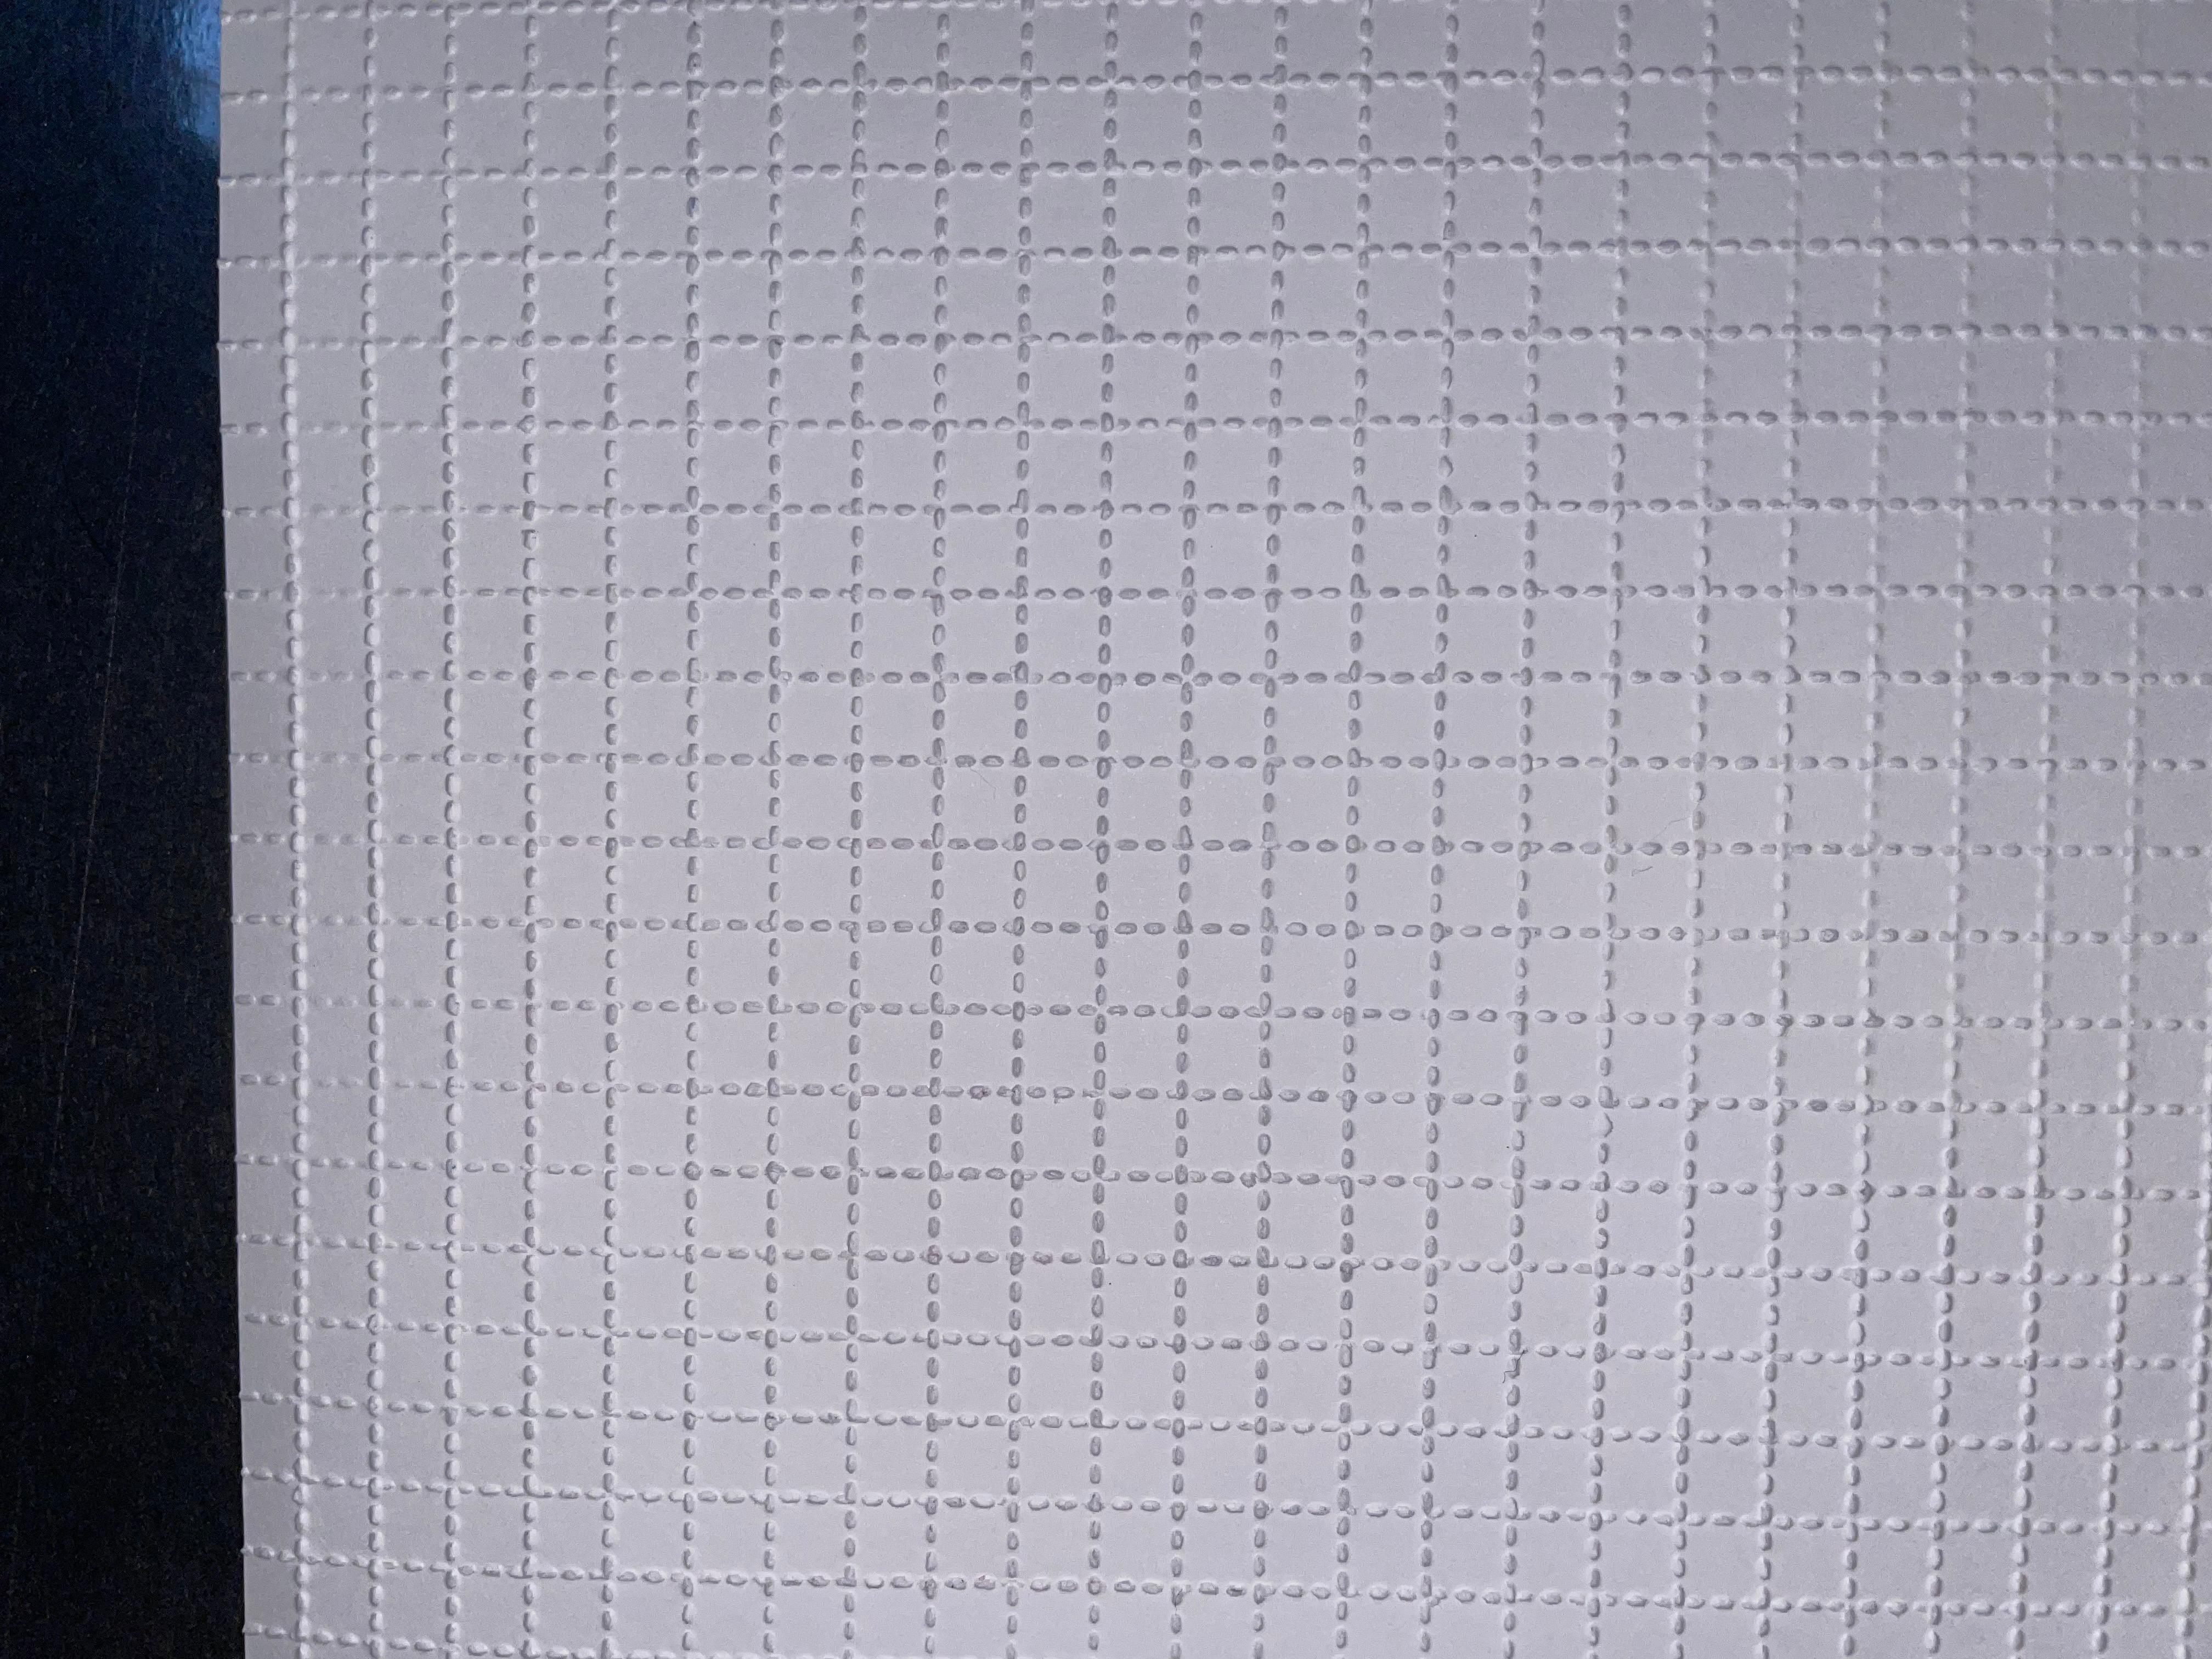 blank perforated blotter paper